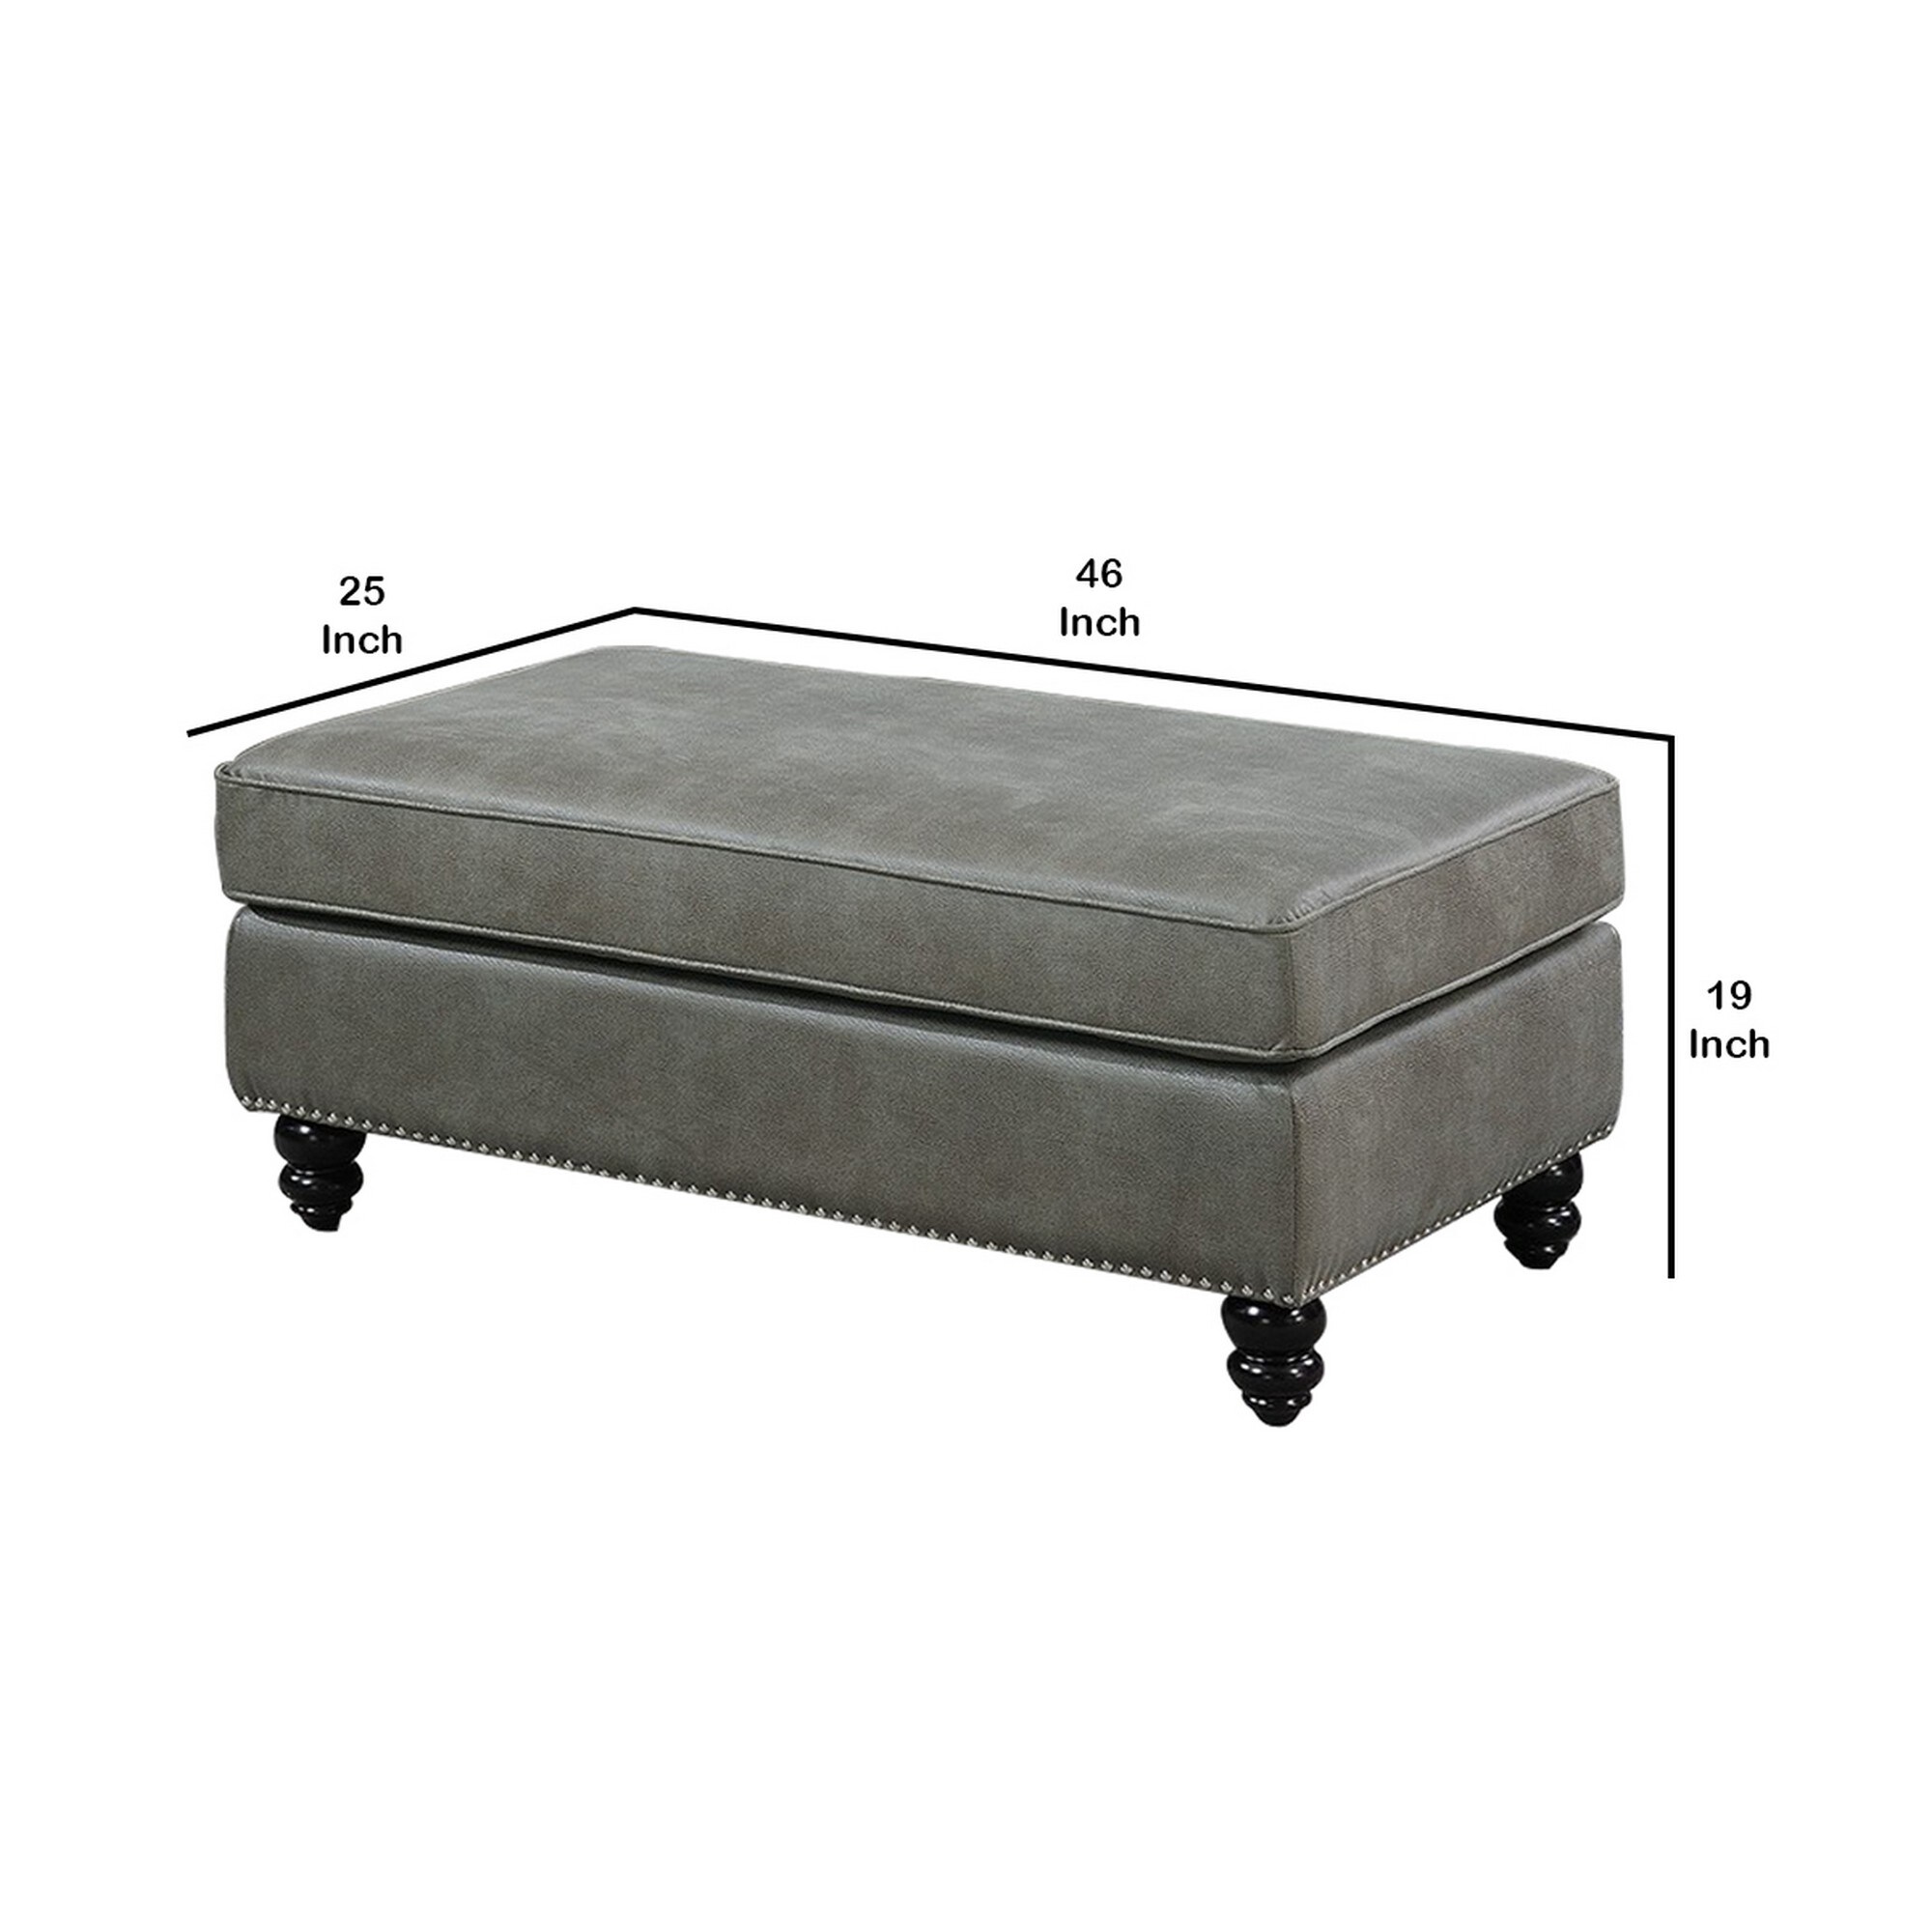 Leatherette Ottoman with Nailhead Trim and Turned Feet, Gray